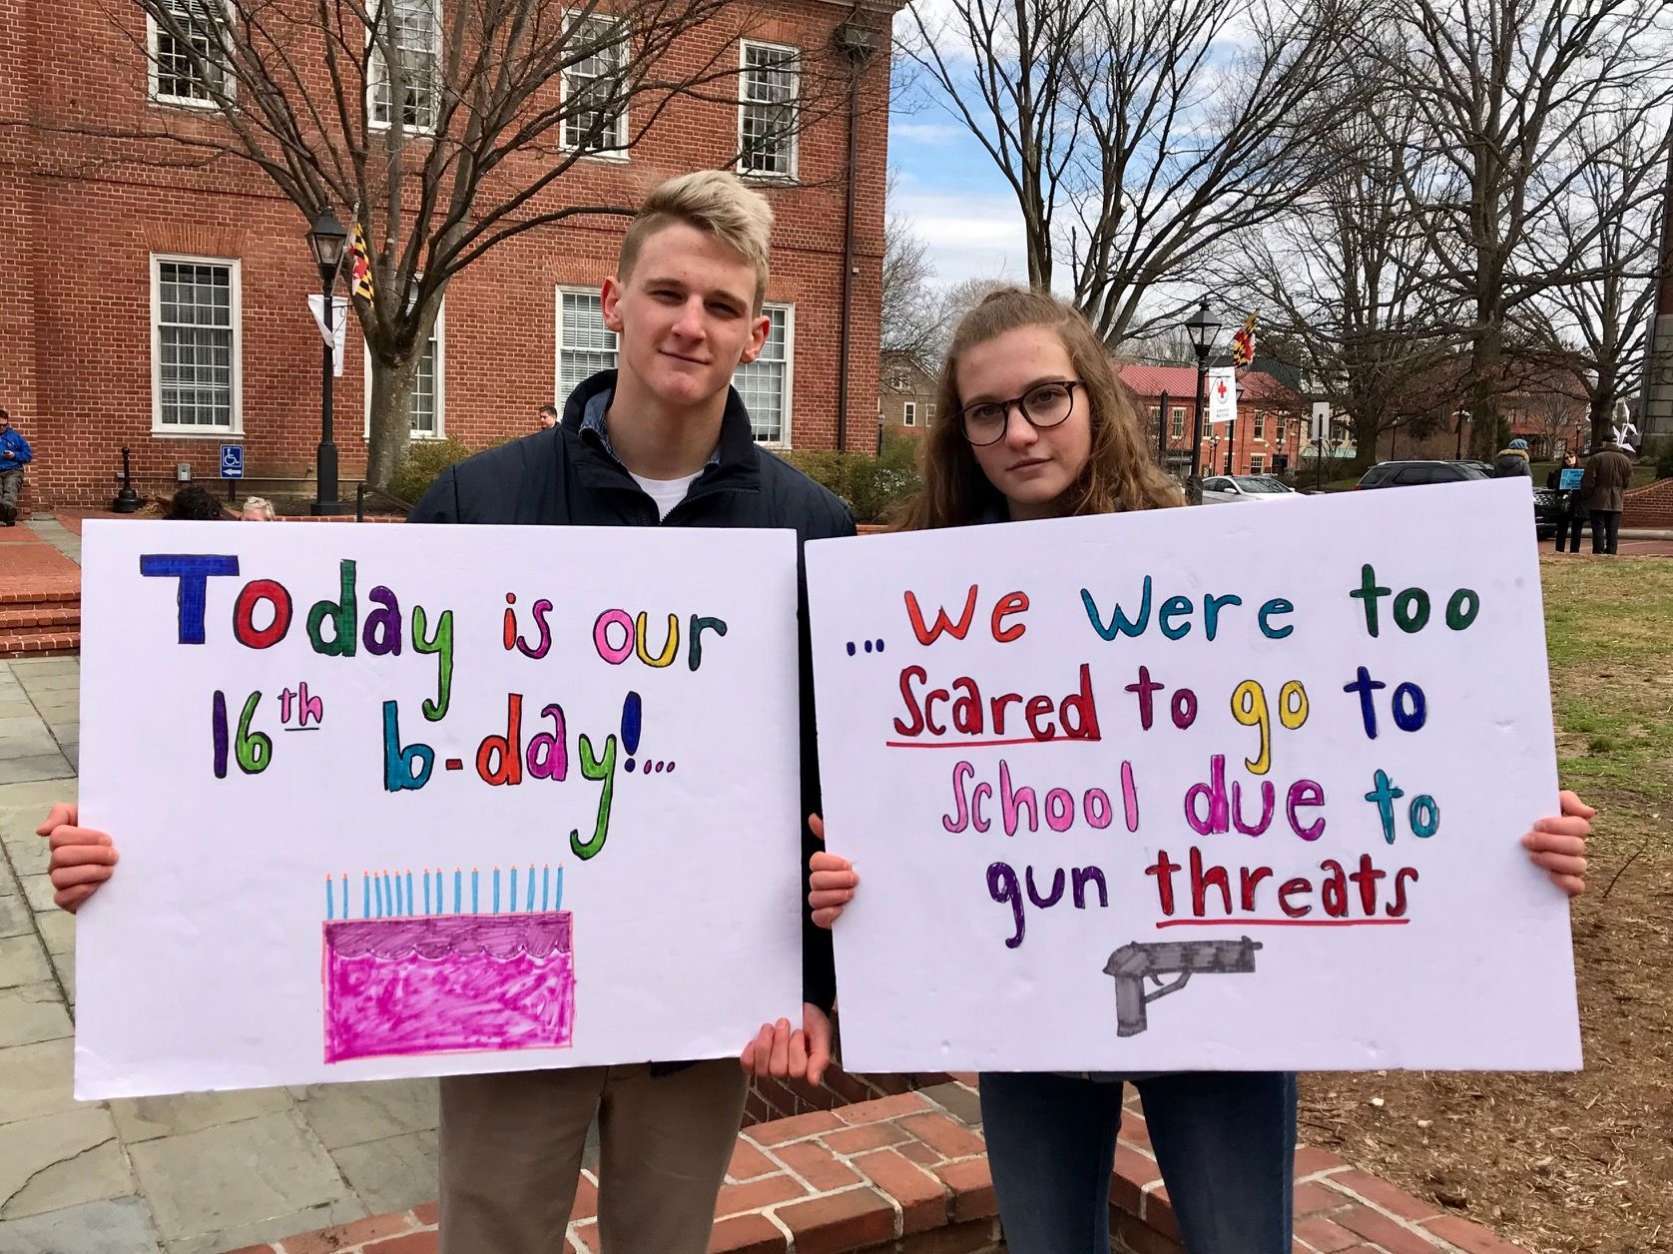 Jack and Karis Arnold took part of their 16th birthday for activism, demonstrating in favor of legislation to better protect students. (WTOP/Megan Cloherty)